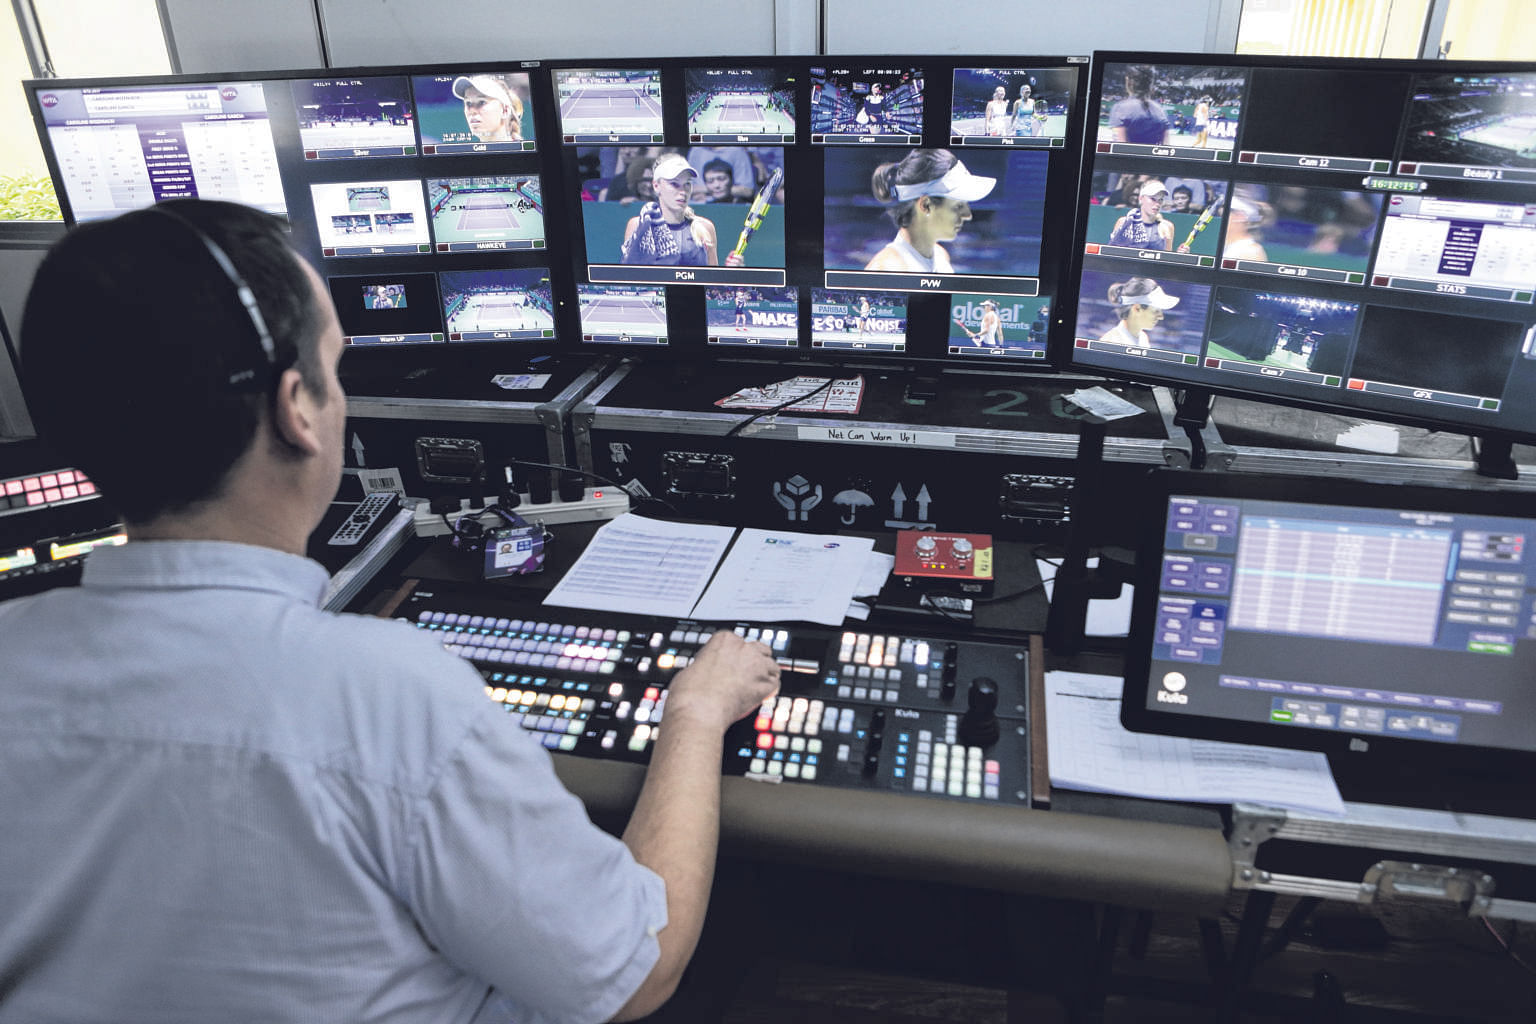 Nic Mills directing the broadcast of the match between Caroline Garcia and Caroline Wozniacki yesterday. The images are beamed to 38 international broadcasters worldwide by a team of over 50 people here.